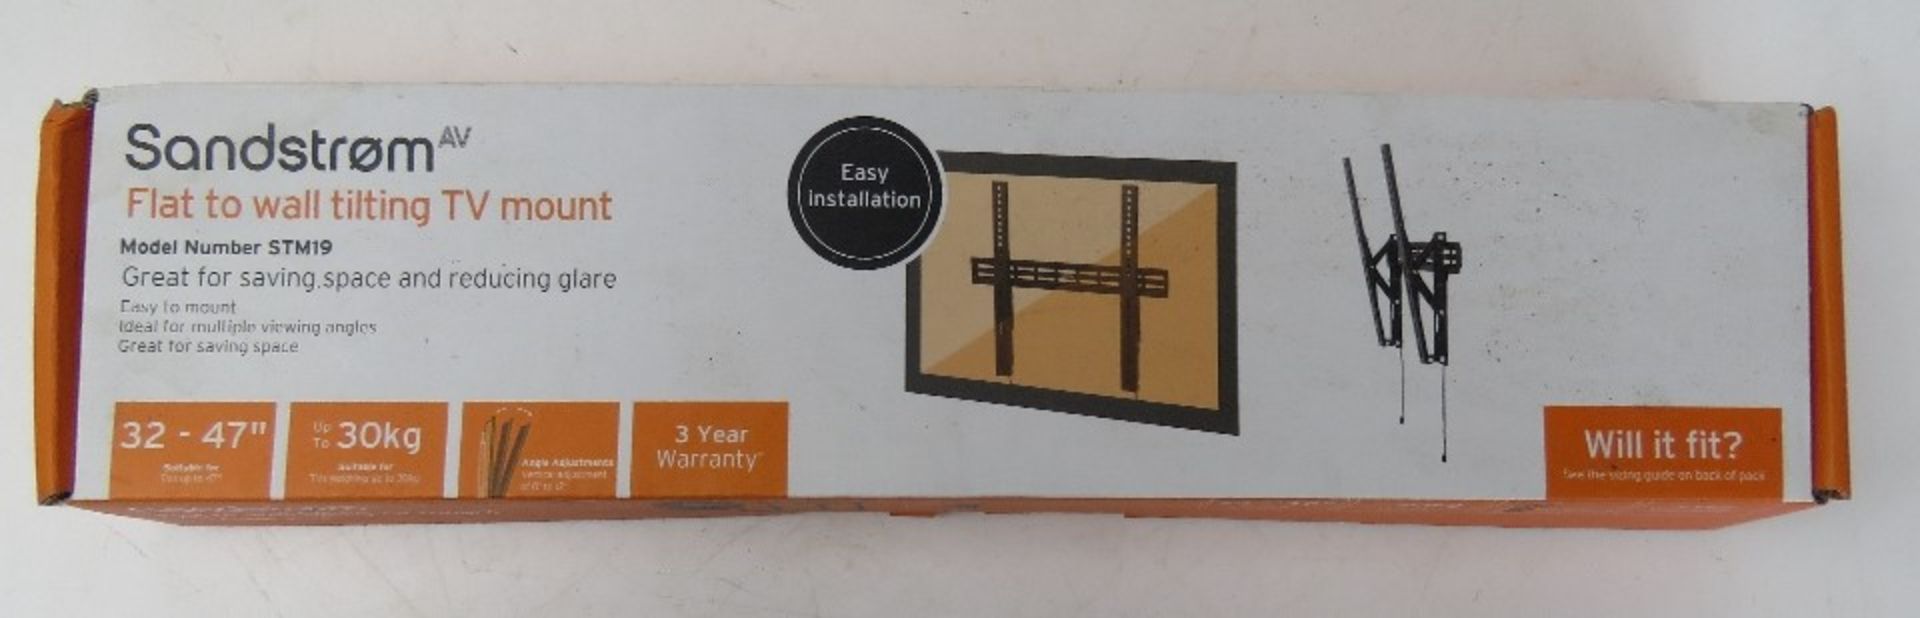 A Samstrom flat to wall tv mount in original box.